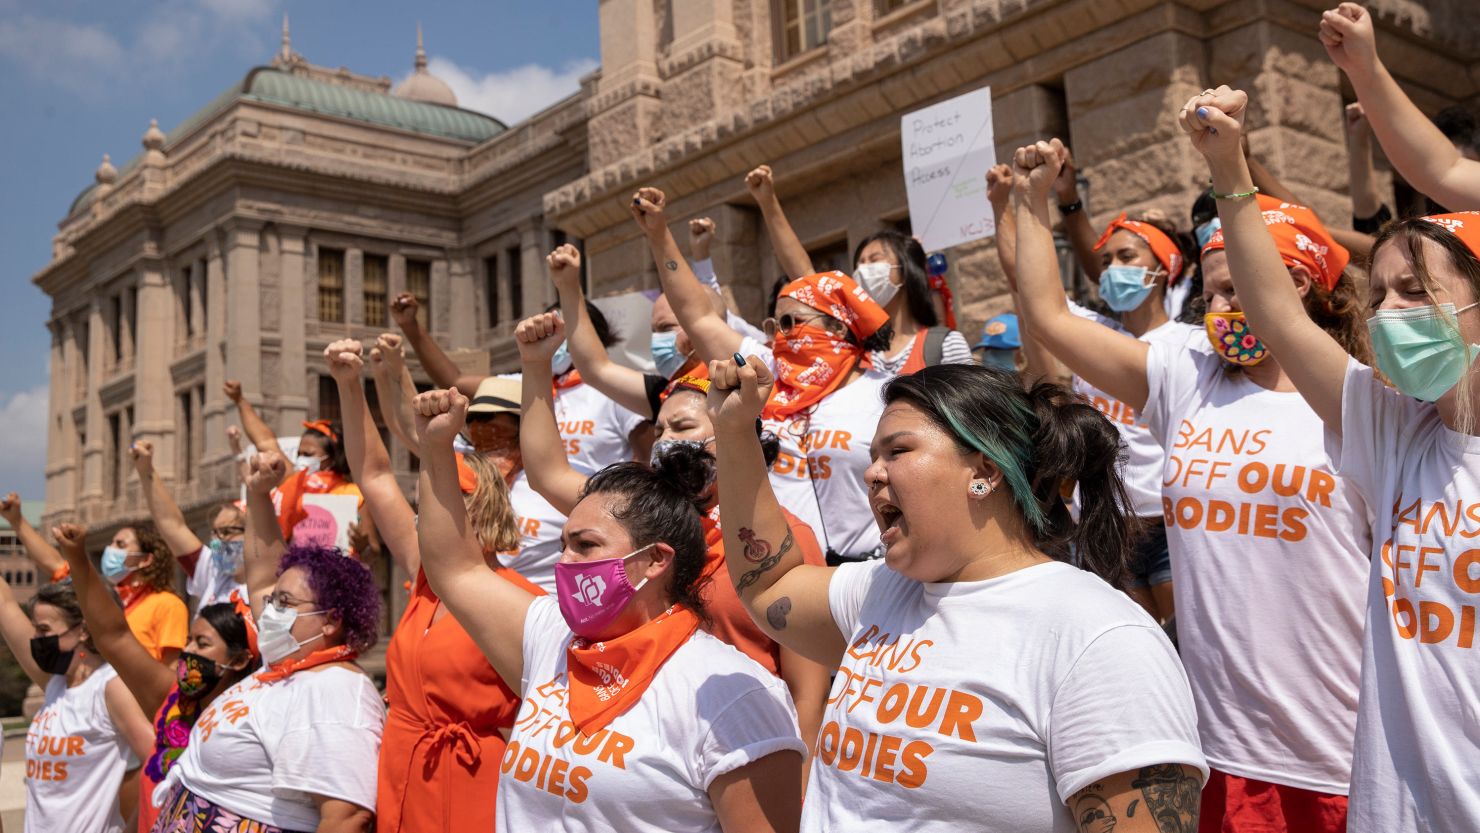 Women protested against the six-week abortion ban outside the state Capitol in Austin, Texas.